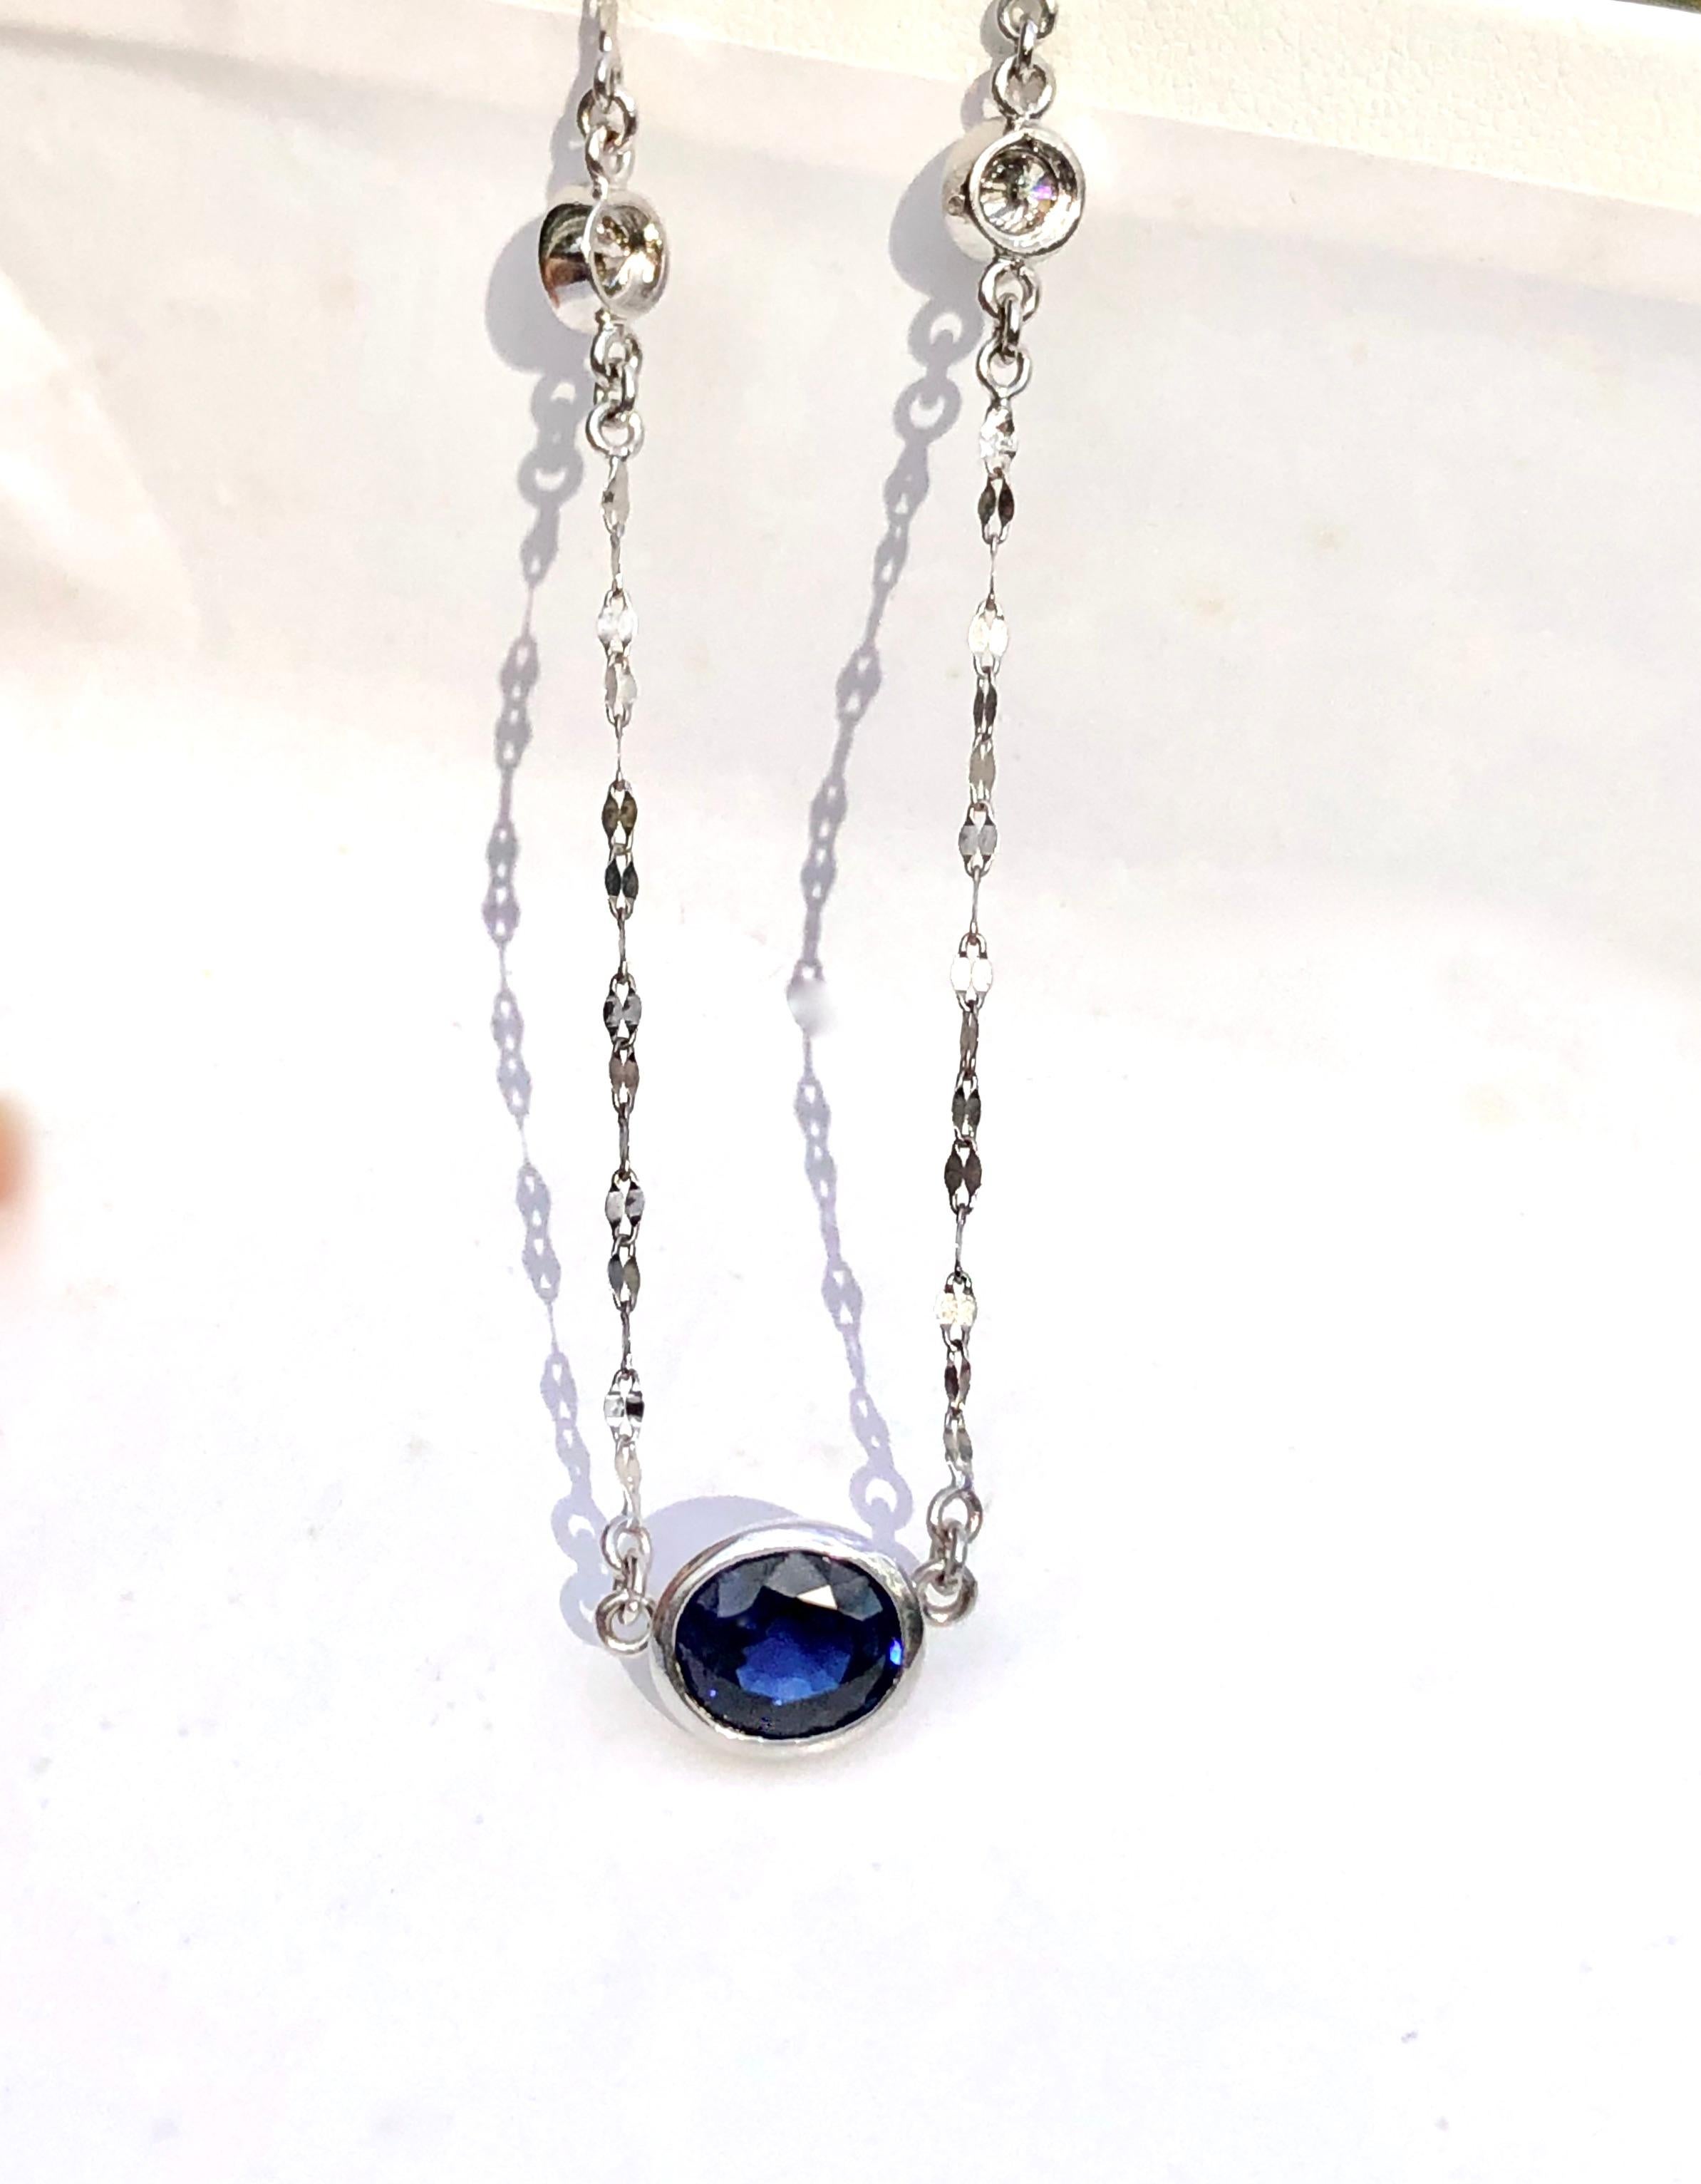 Contemporary 3.17 Carat Oval Shape Blue Sapphire and Diamond Solitaire Pendant Necklace For Sale